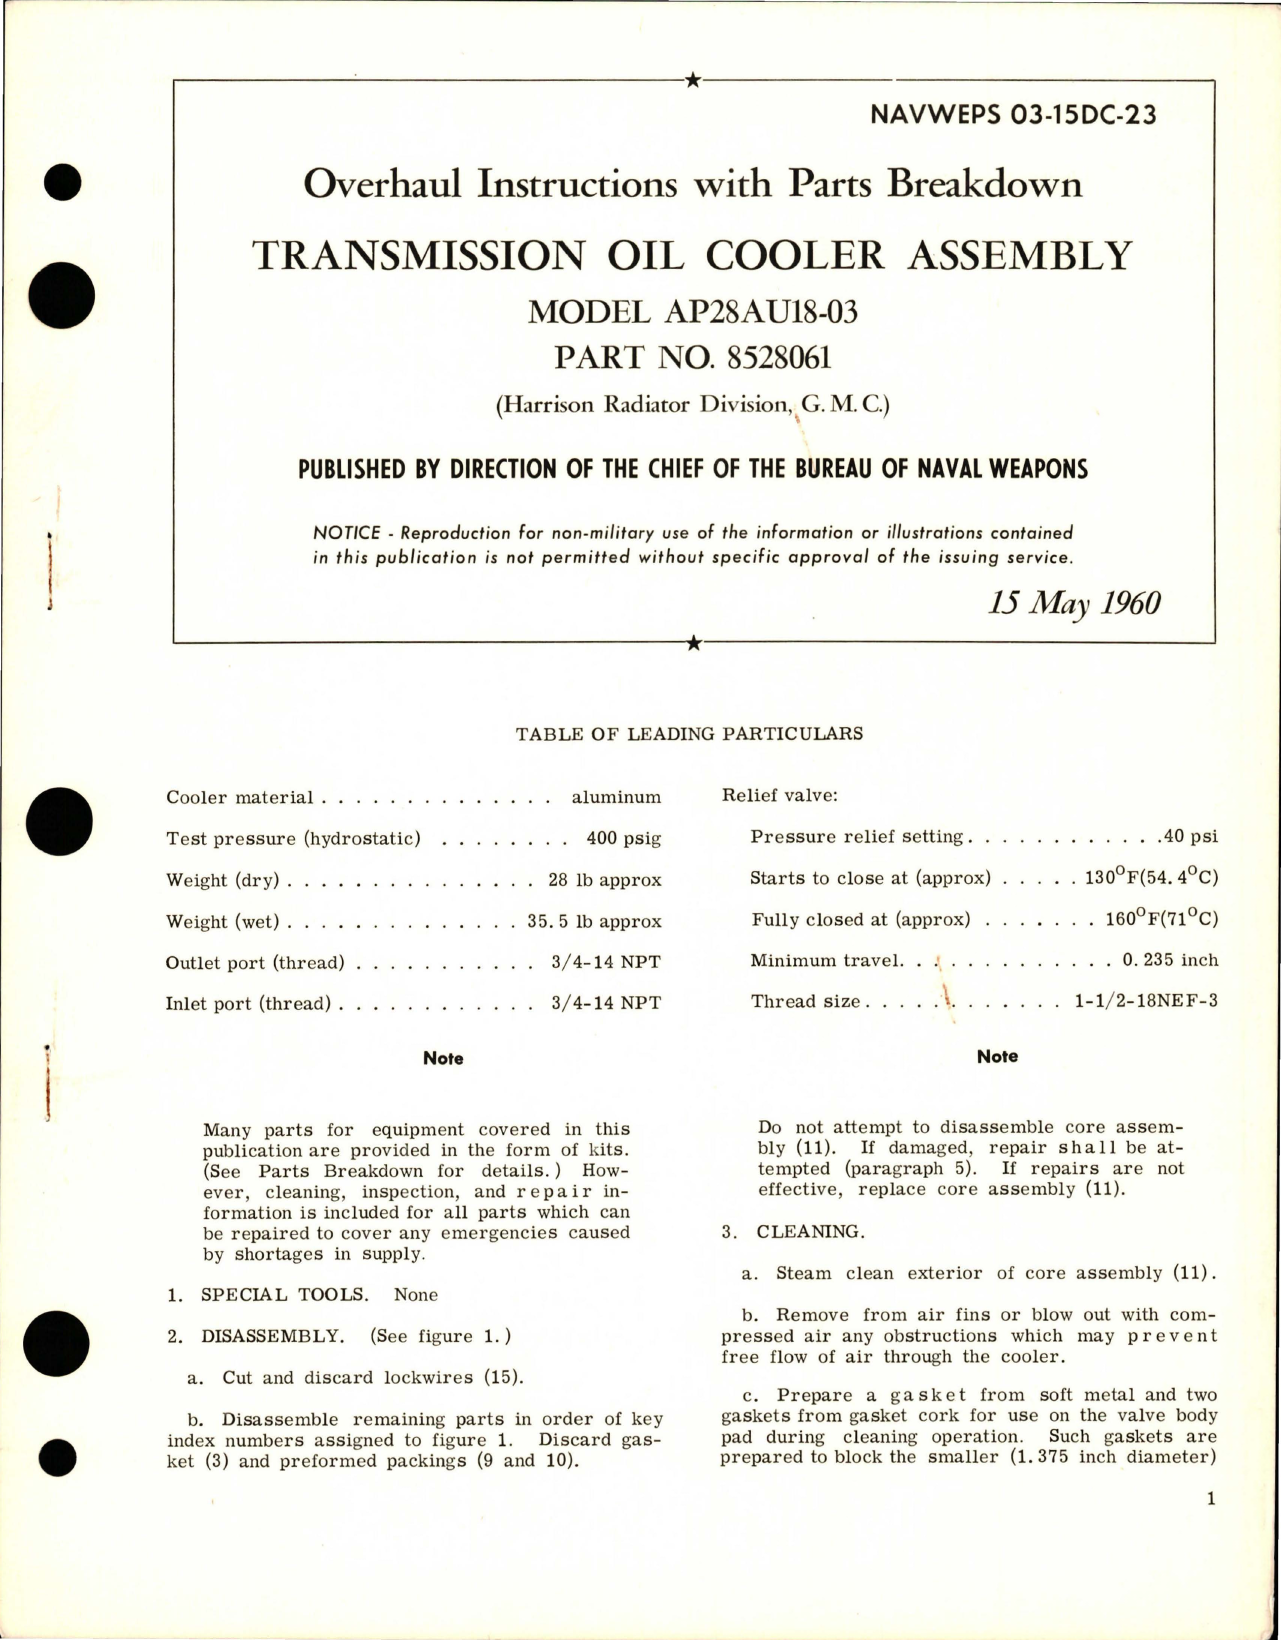 Sample page 1 from AirCorps Library document: Overhaul Instructions with Parts Breakdown for Transmission Oil Cooler Assembly - Model AP28AU18-03 - Part 8528061